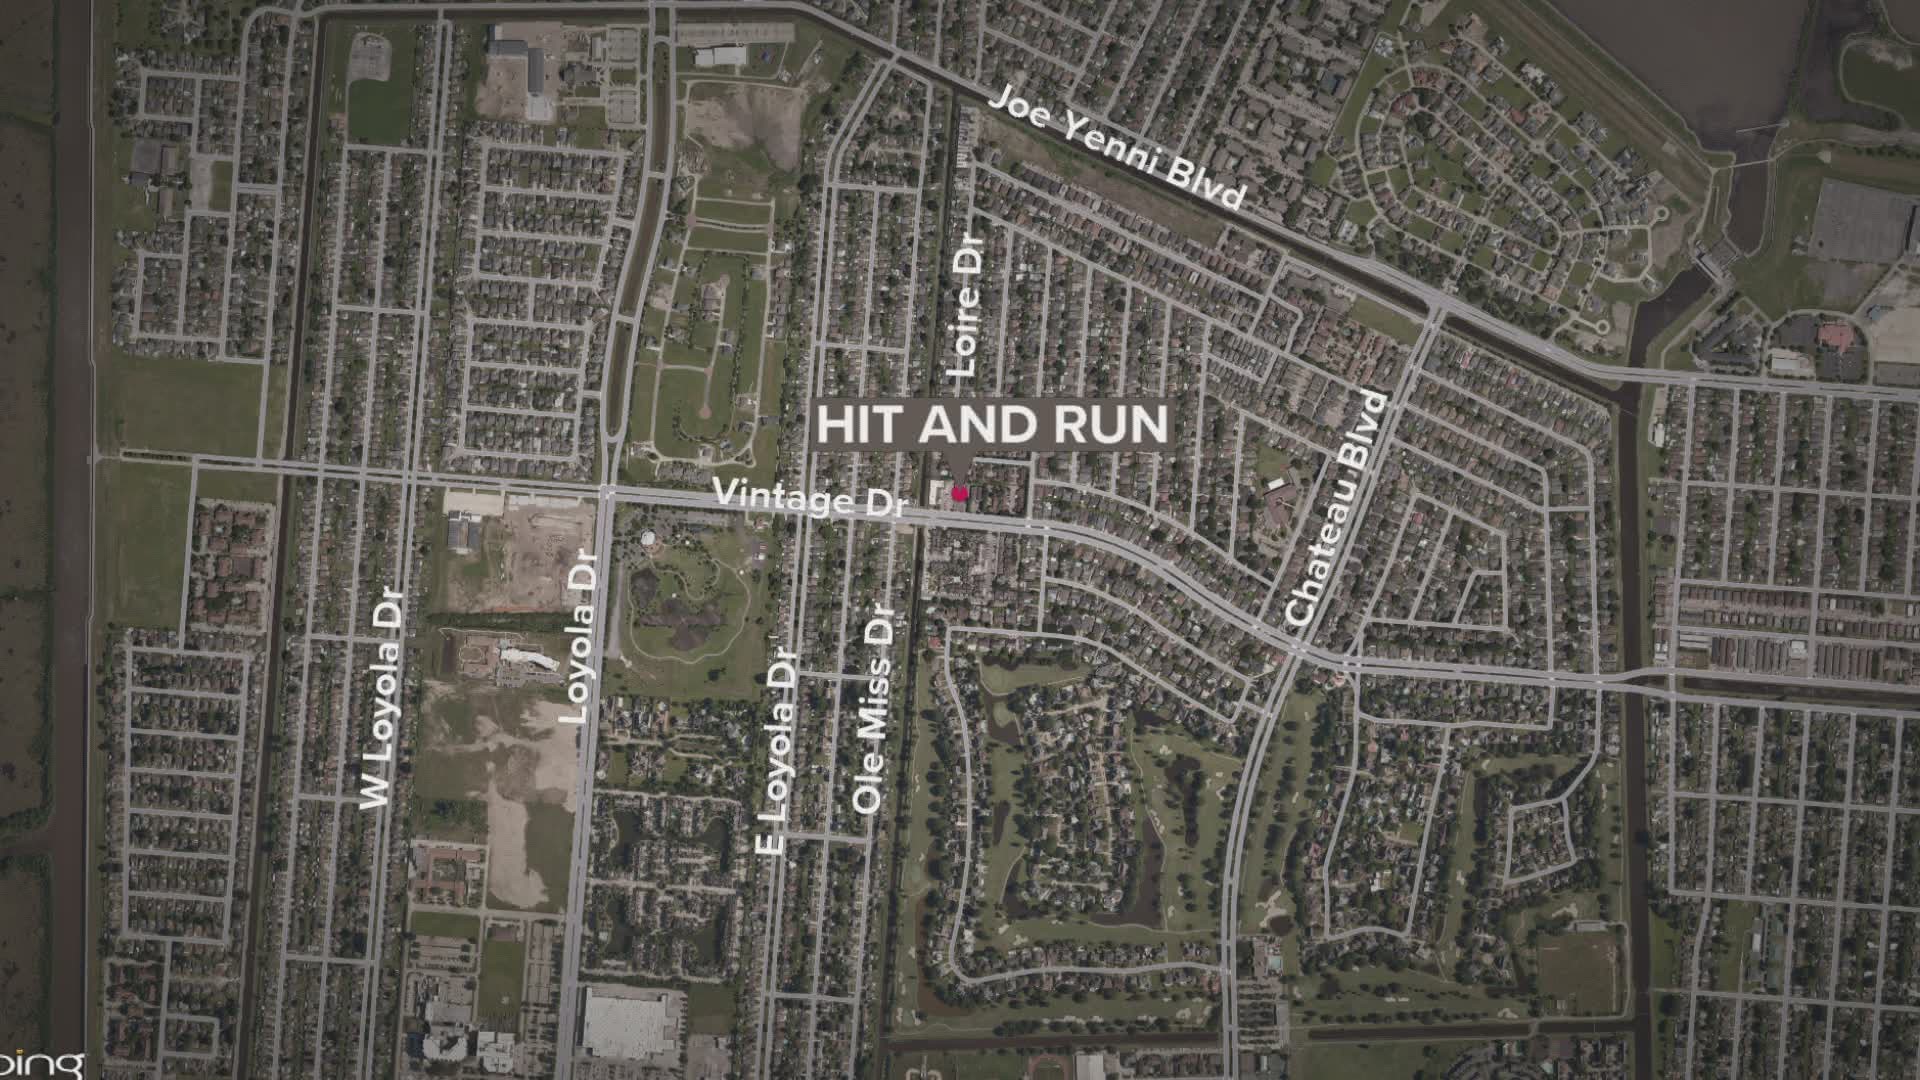 A child is now in critical condition after being injured in a hit and run accident.